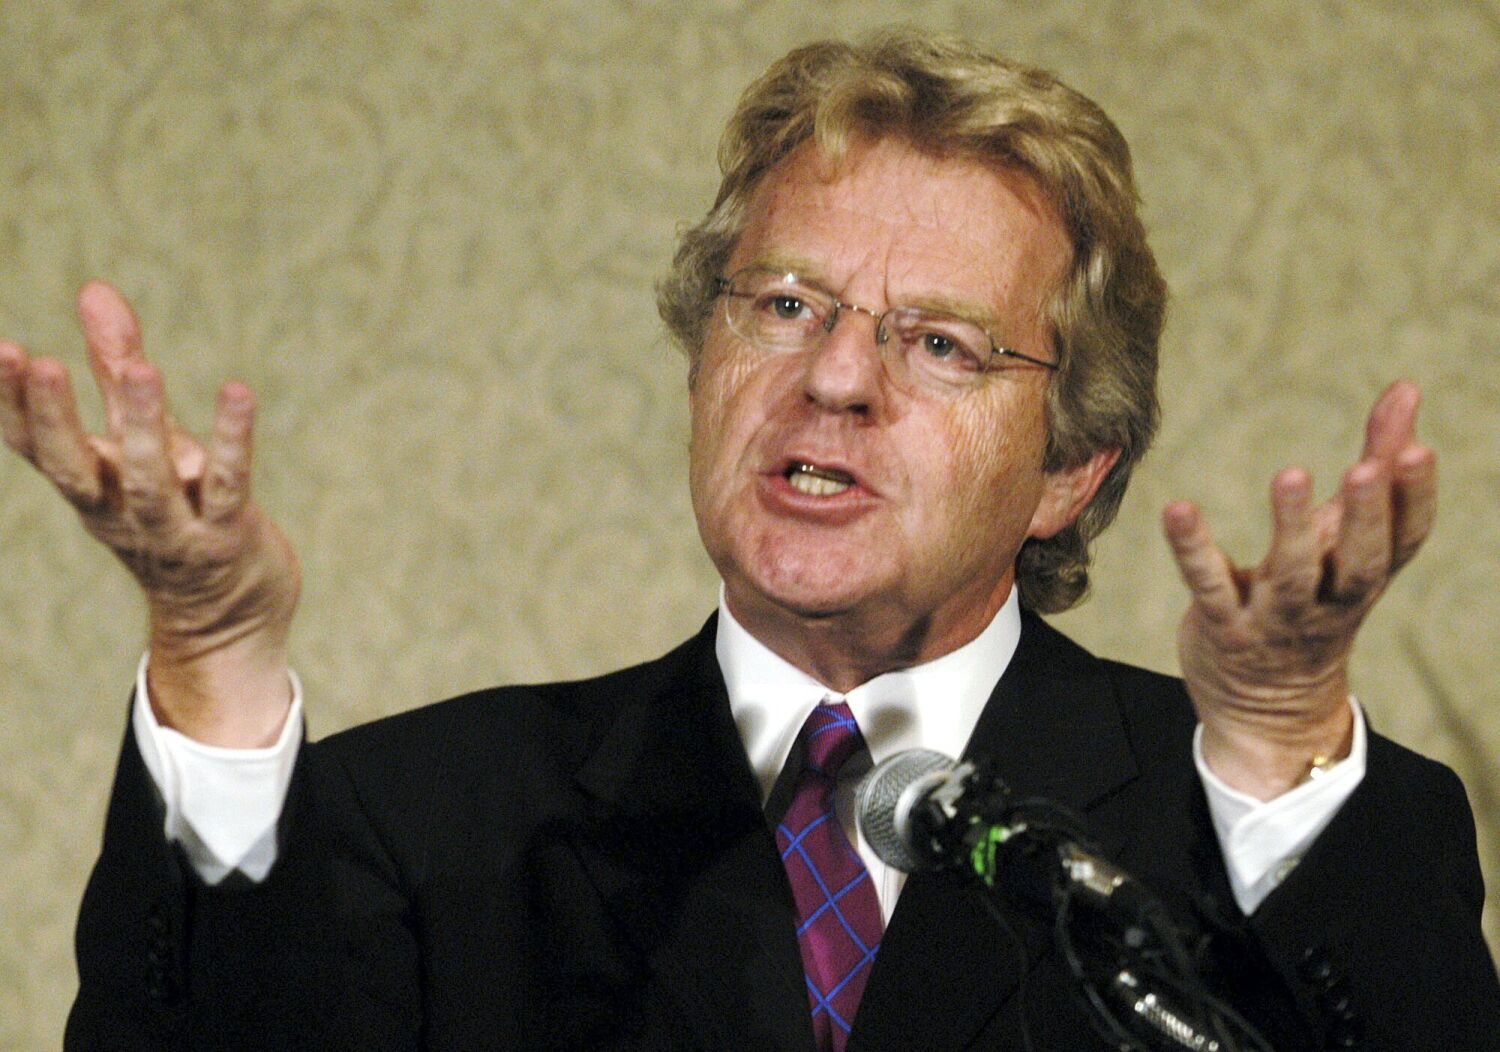 Final thought: Love him or loathe him, Jerry Springer was millennials' 'babysitter'